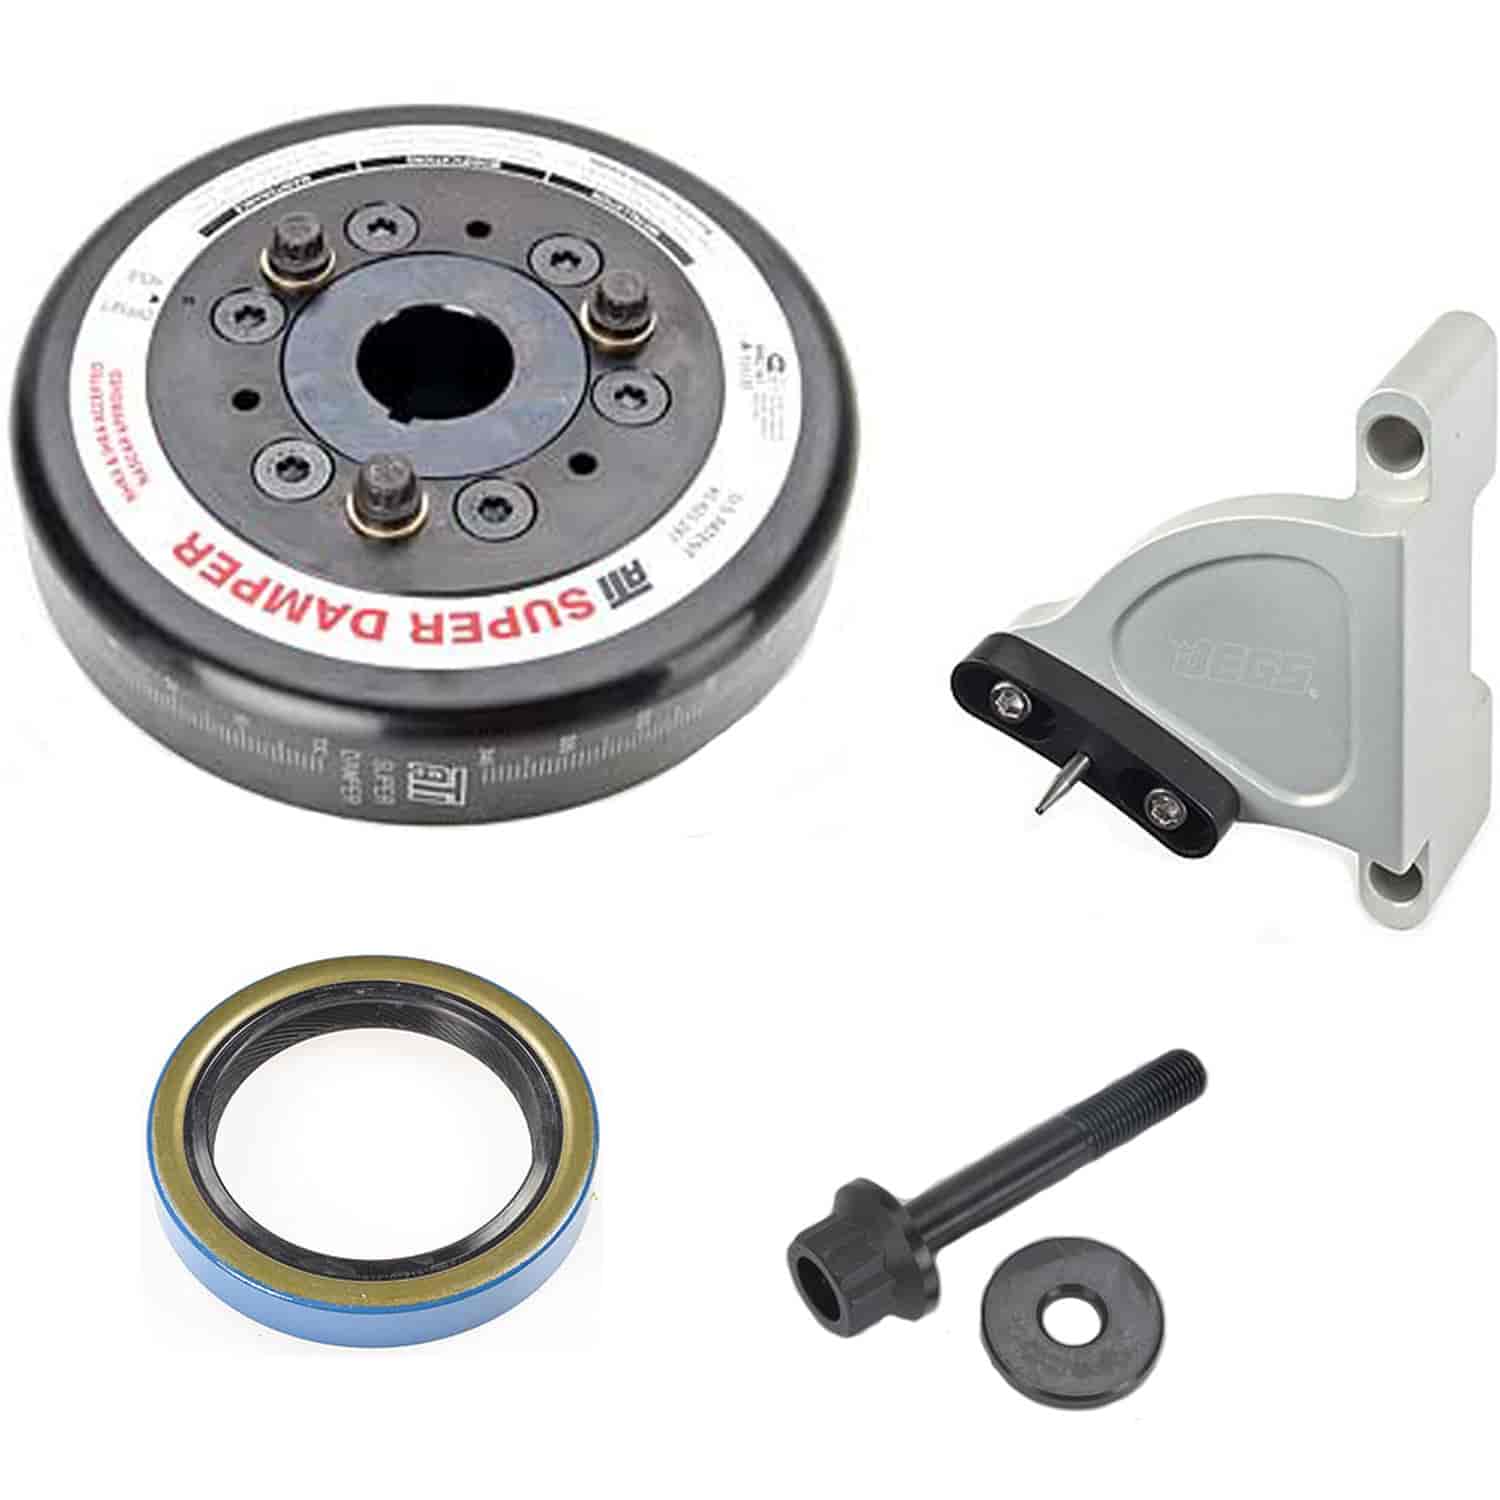 Super Damper Kit for Pontiac 2.5L and Small